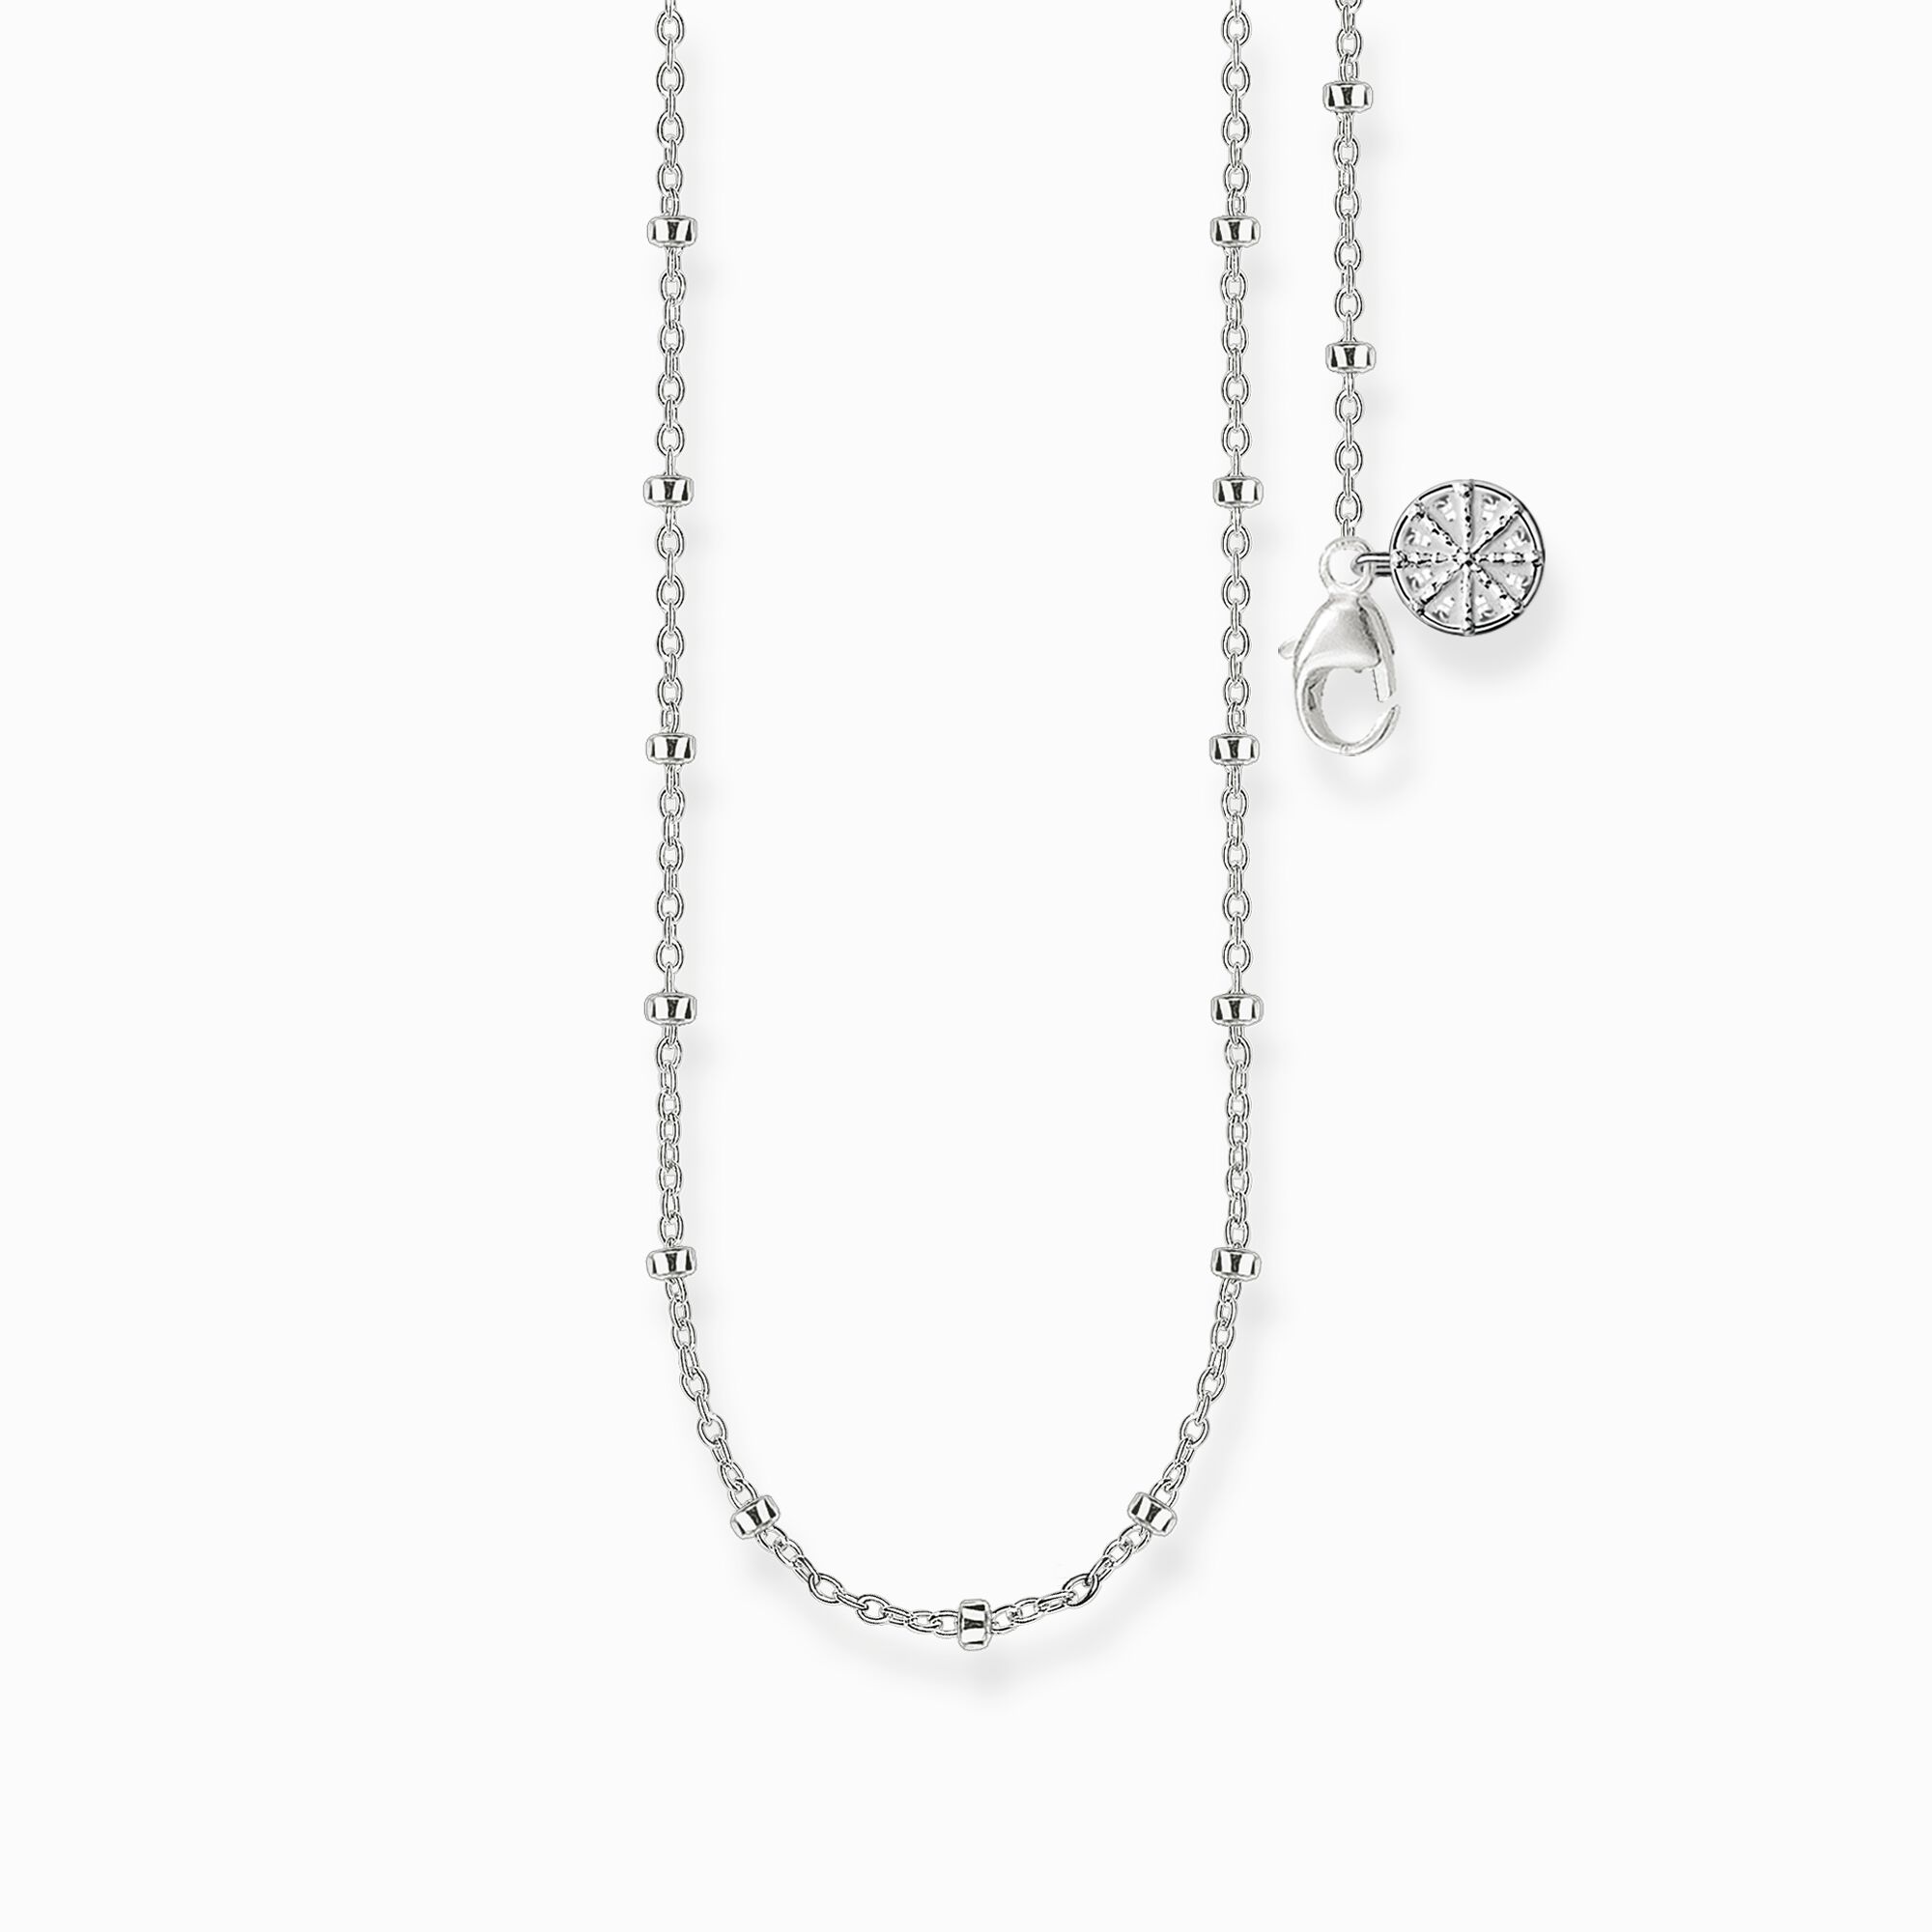 chain for Beads from the Karma Beads collection in the THOMAS SABO online store